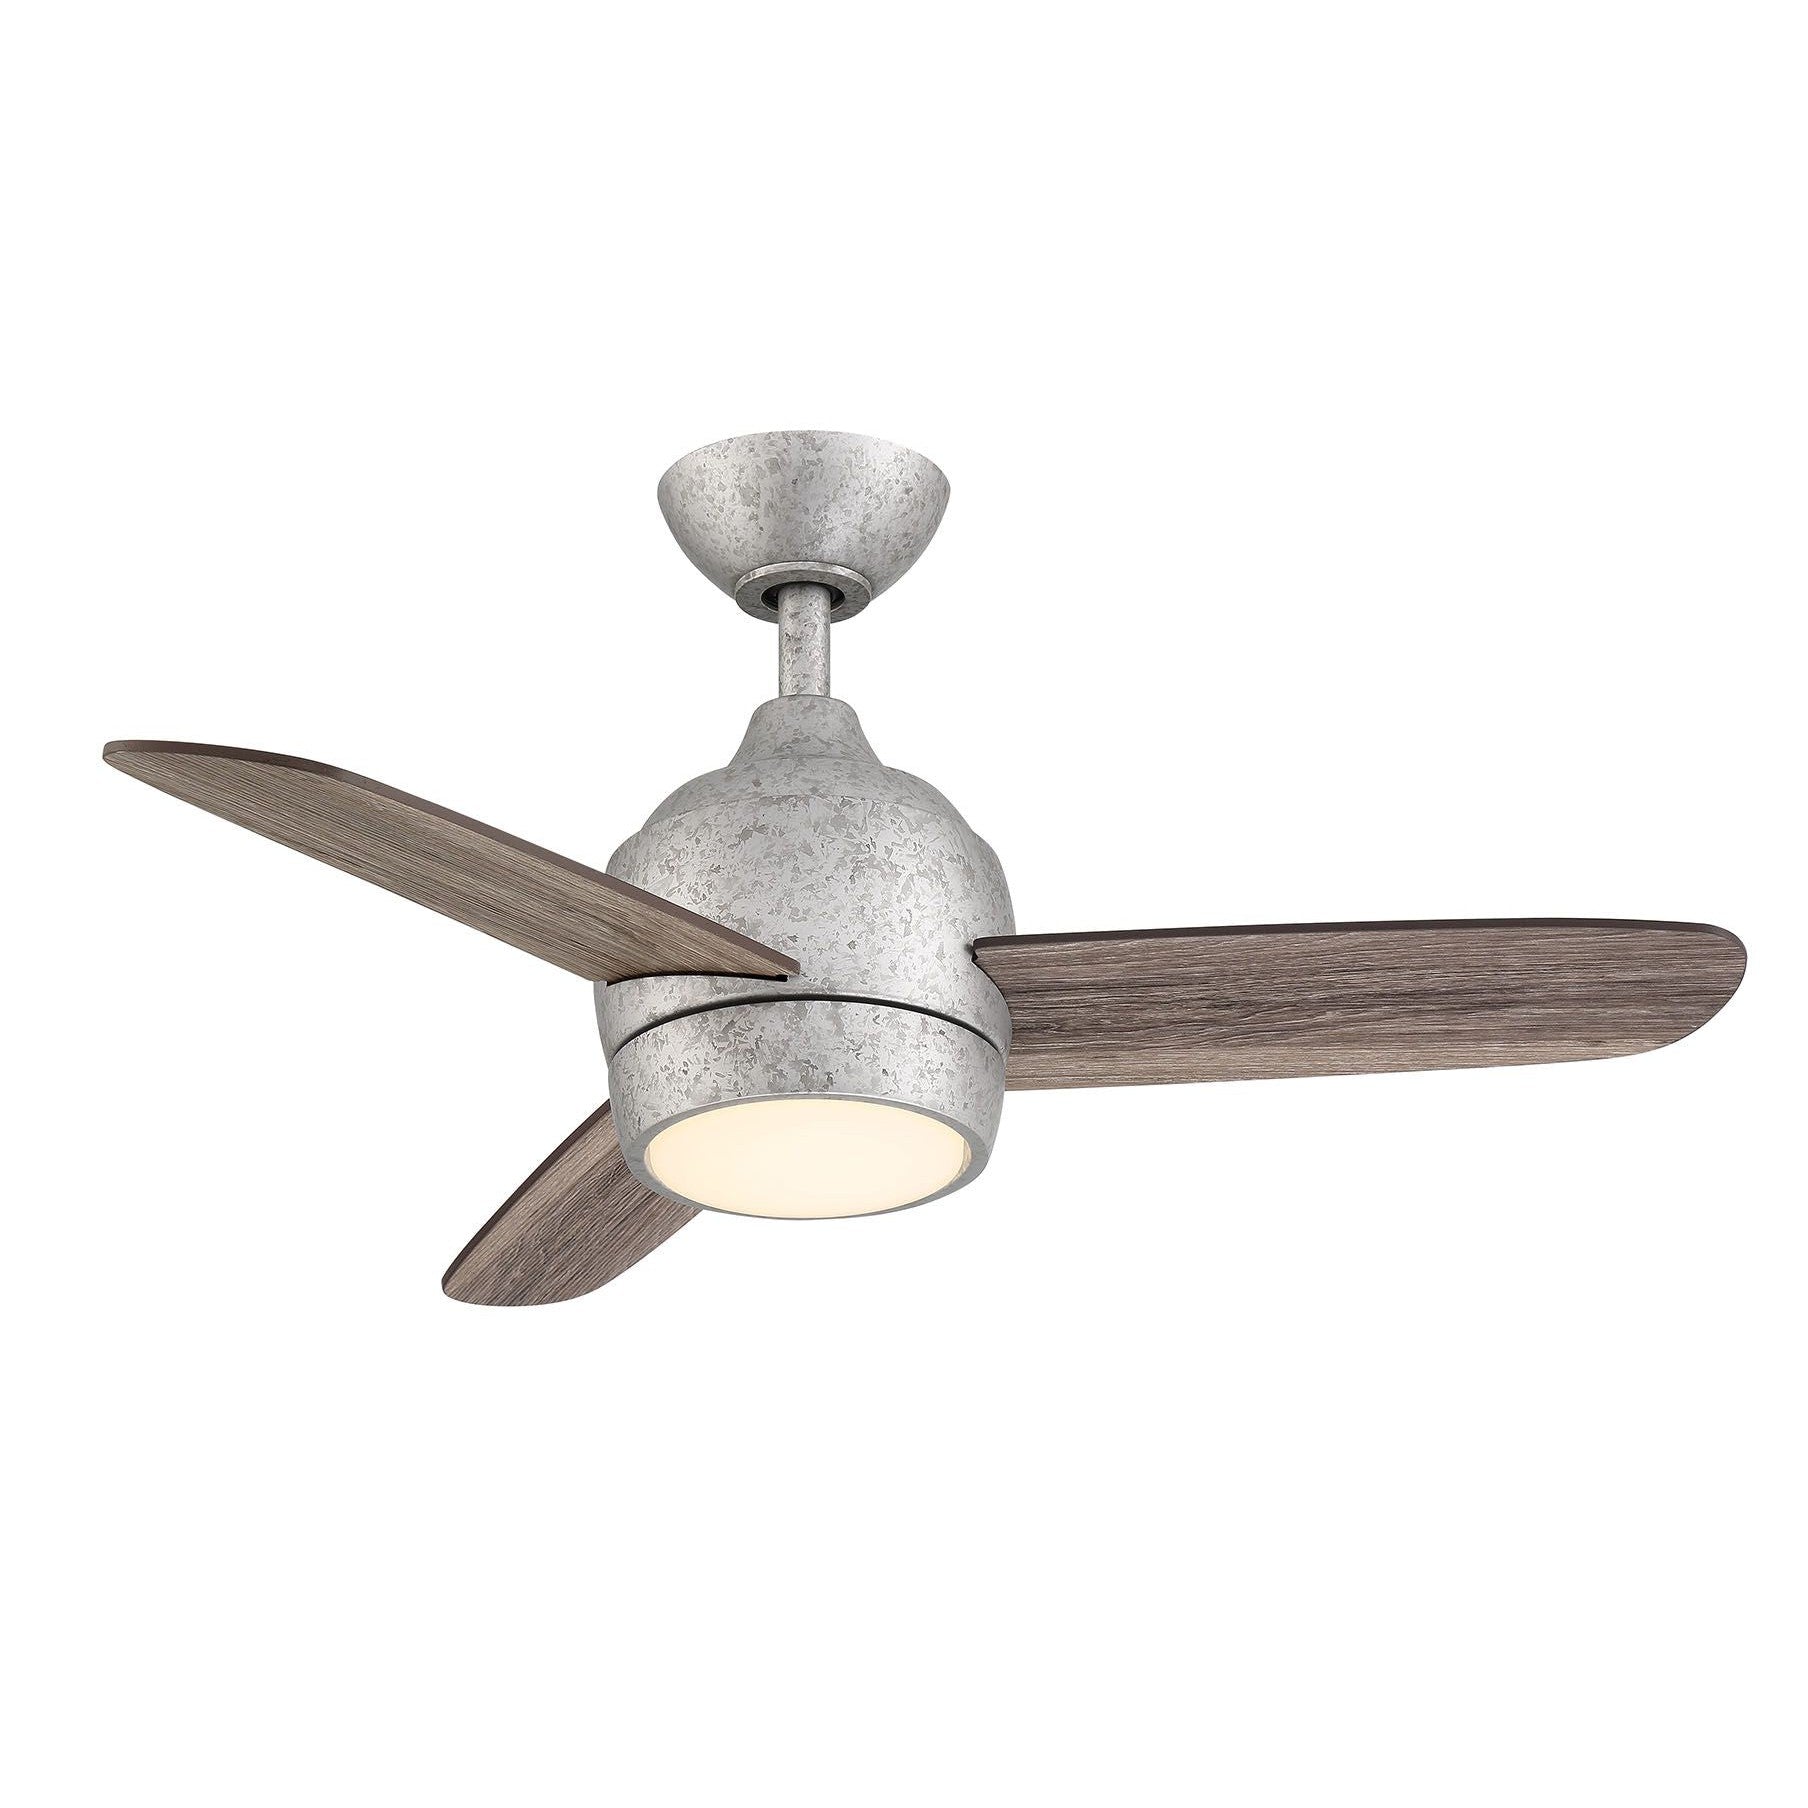 Wind River Fans The Mini 36" 3 Blade Outdoor LED Ceiling Fan